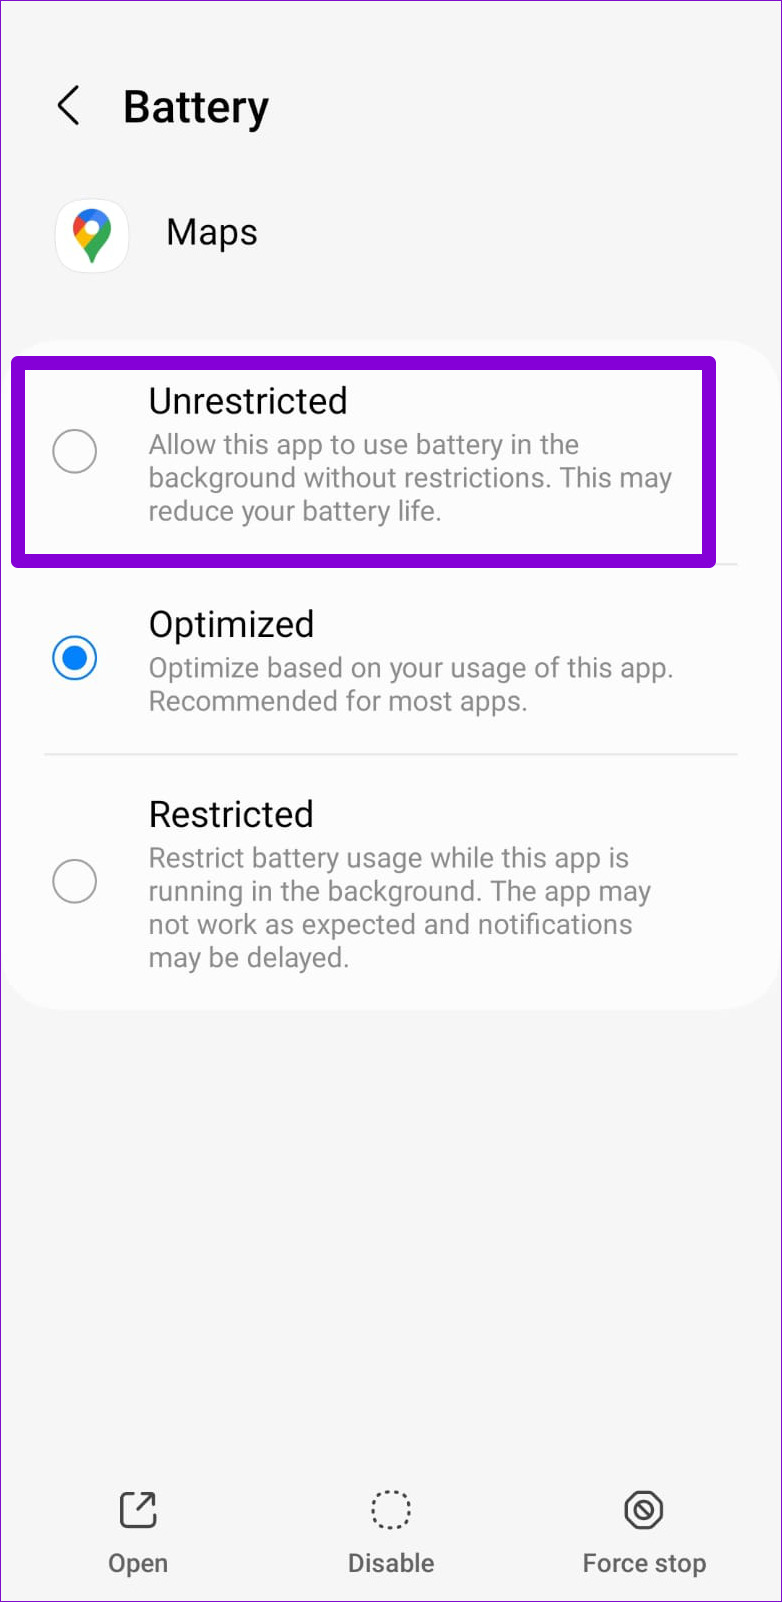 Unrestricted Battery Usage to Google Maps